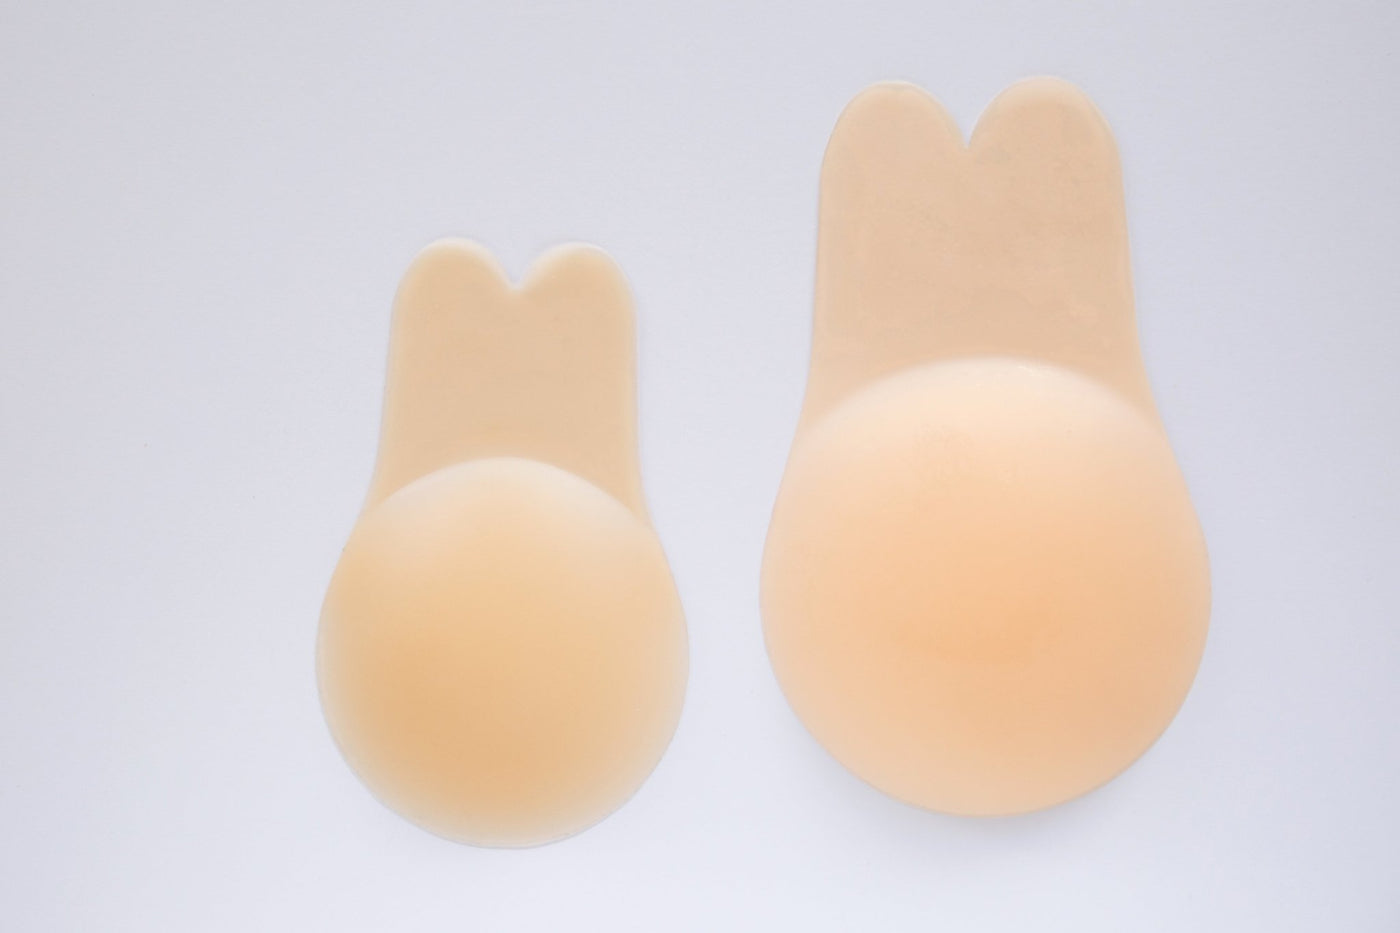 Bunny Ears (Fabric) - Breast Lift Cups - Shape Clothing